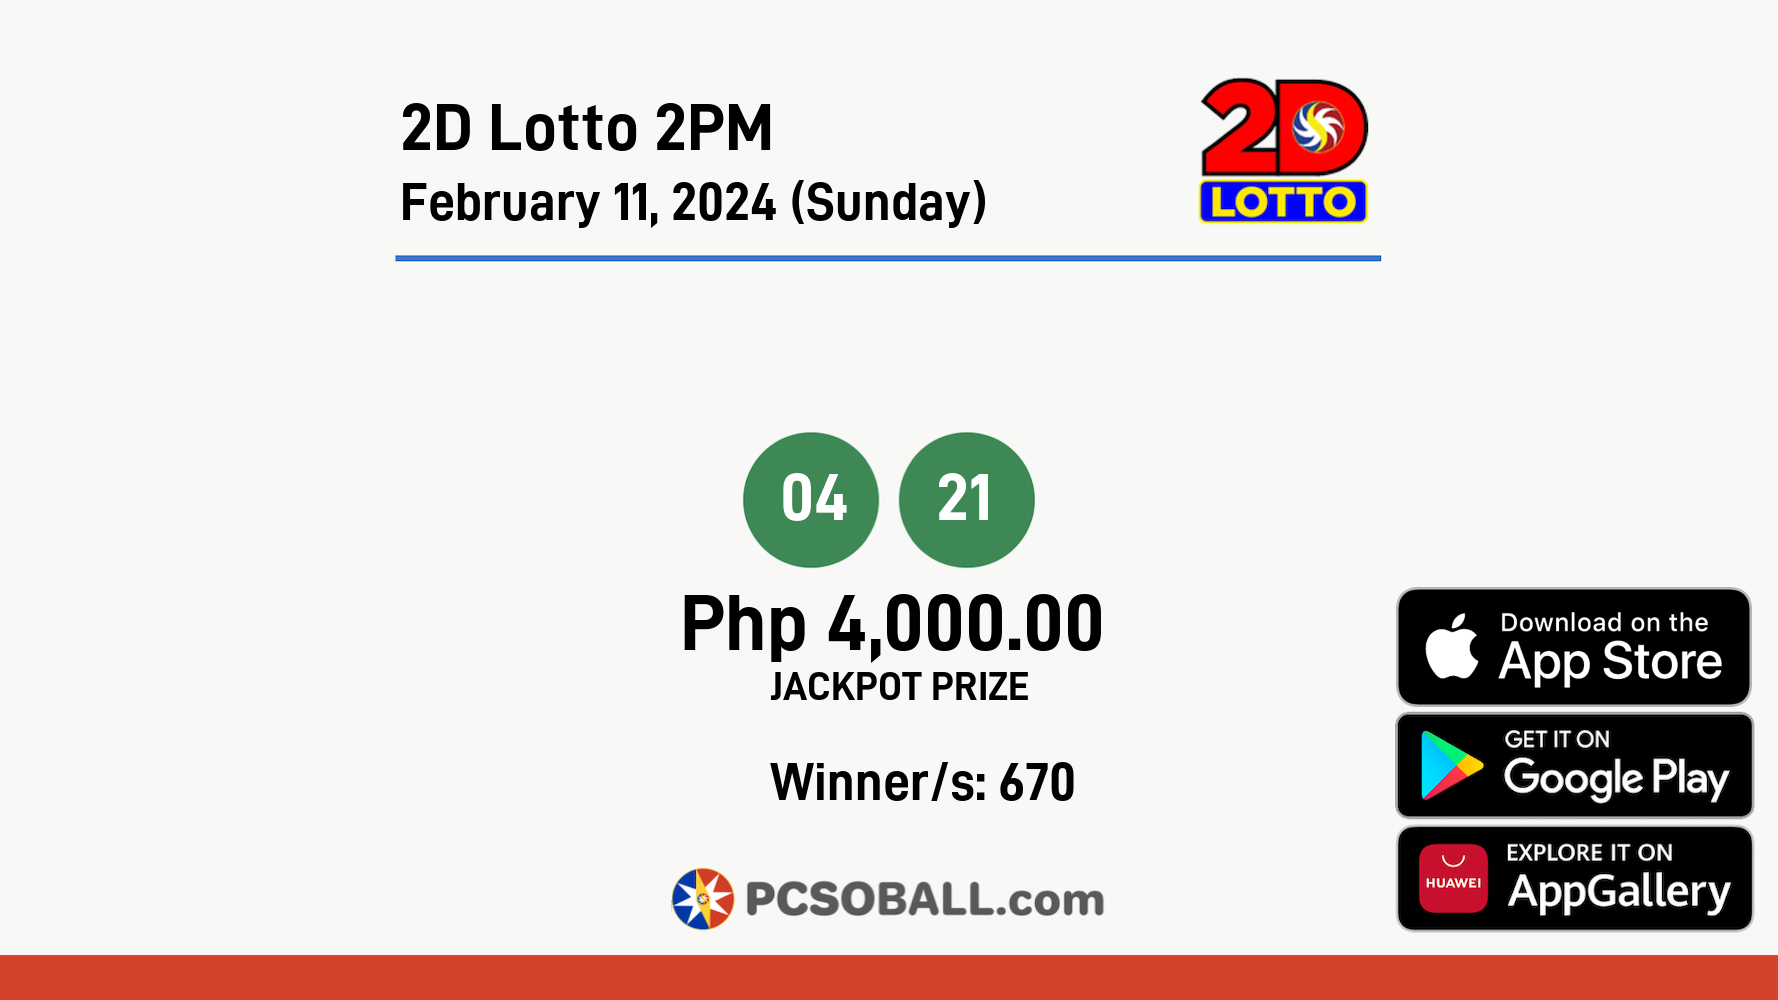 2D Lotto 2PM February 11, 2024 (Sunday) Result